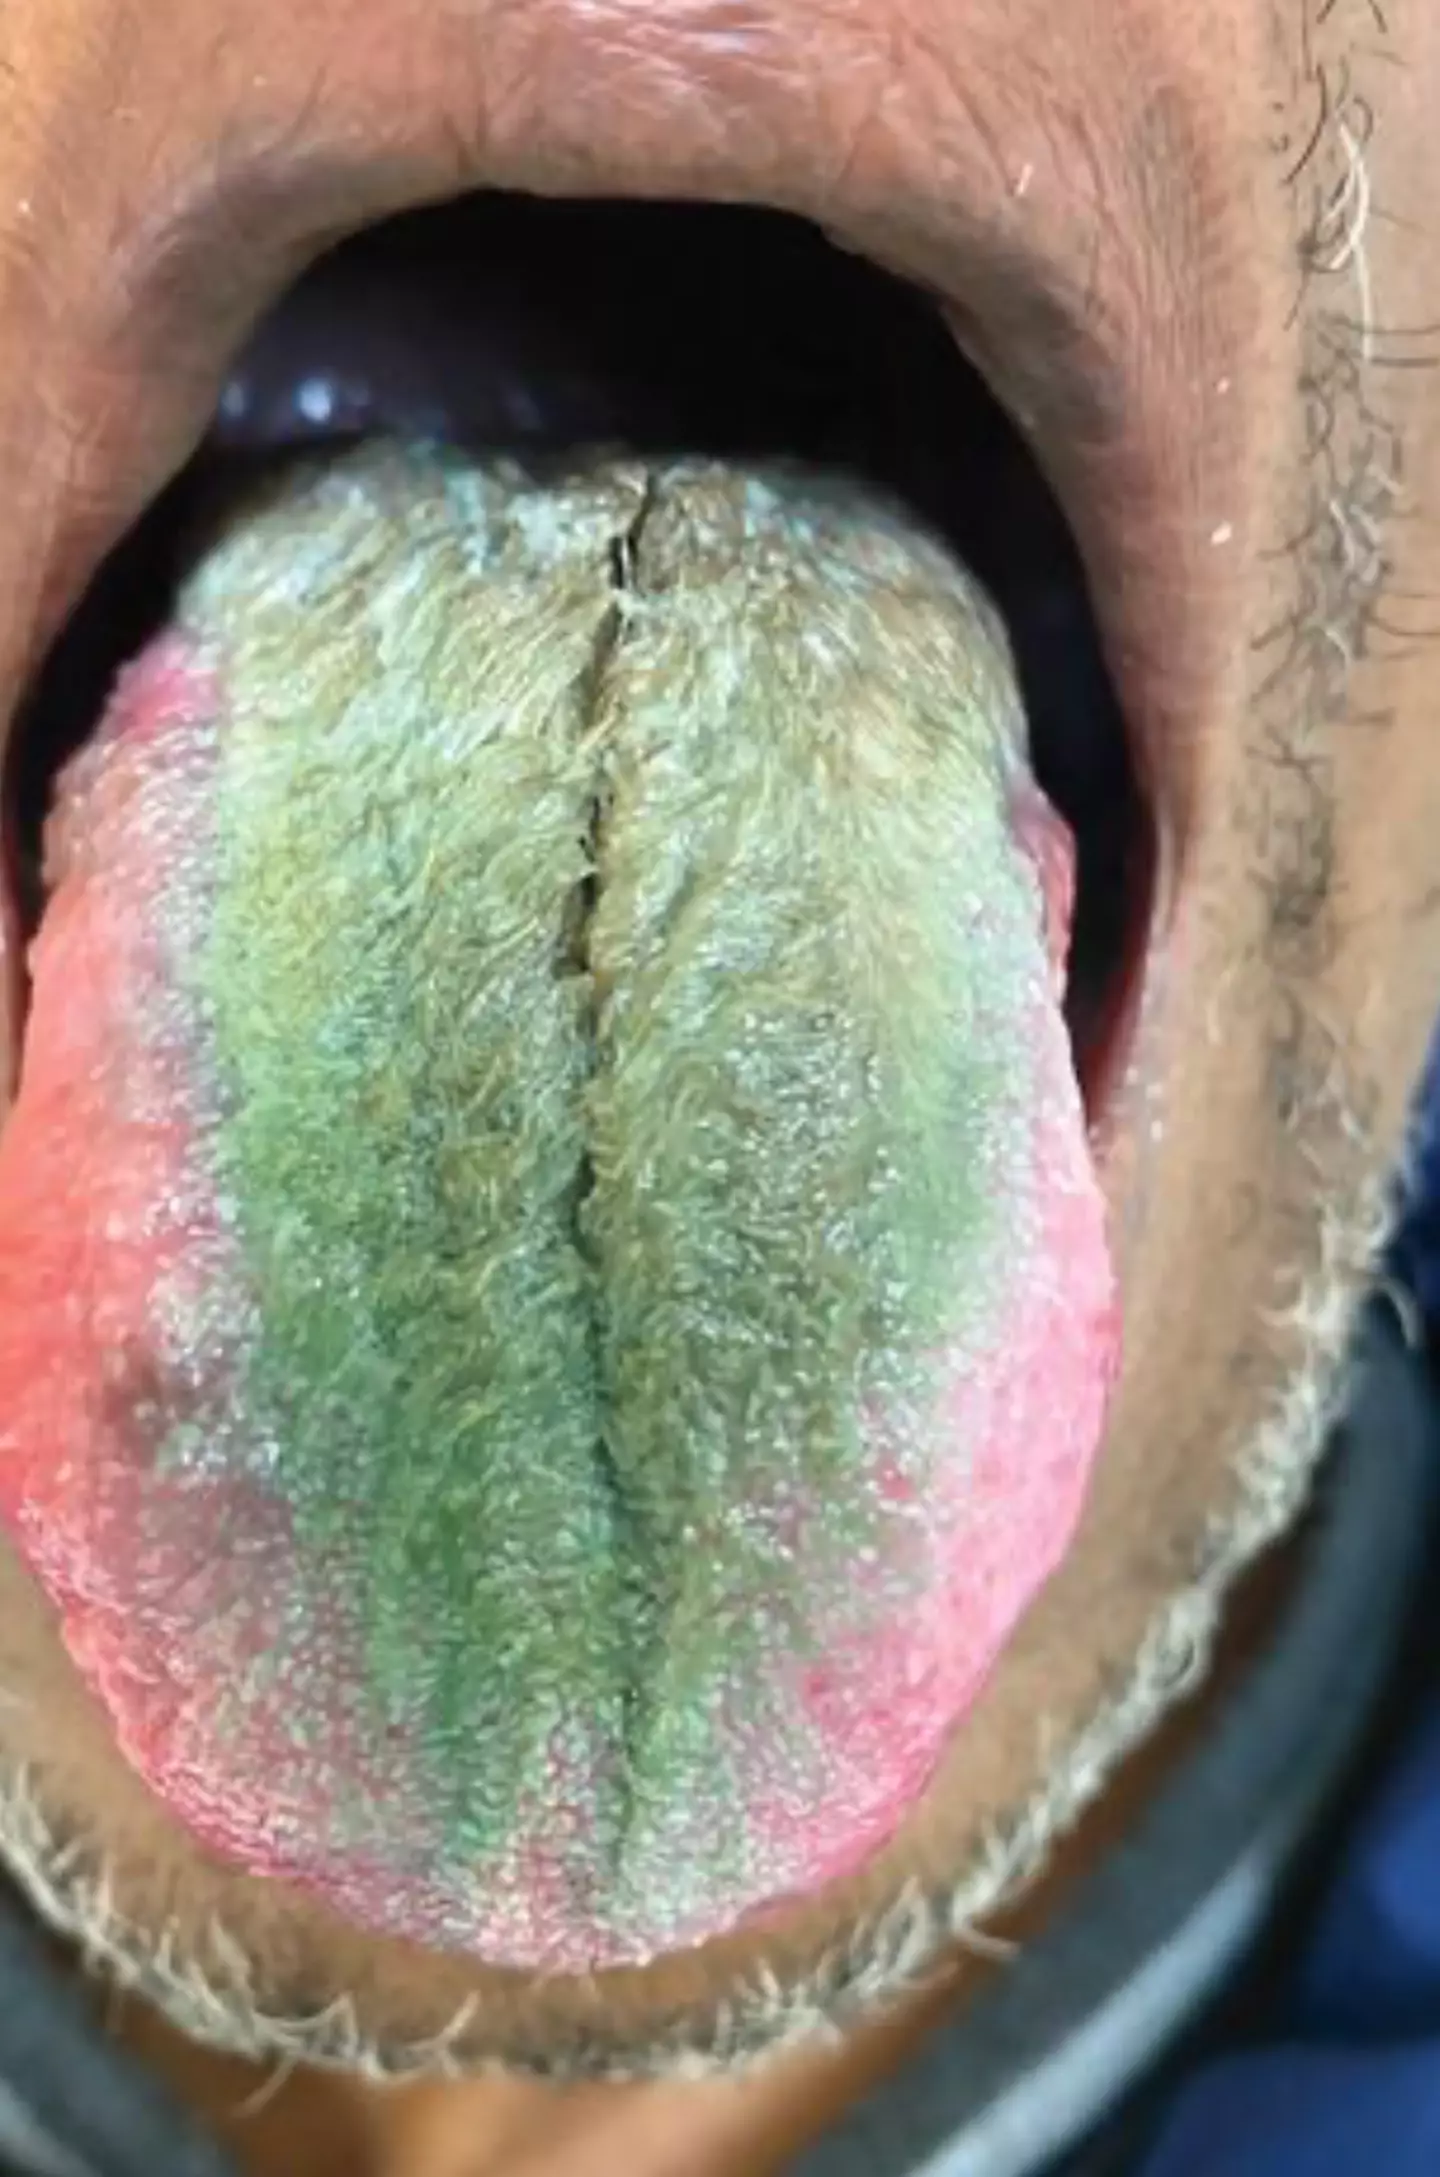 The man's tongue turned green!